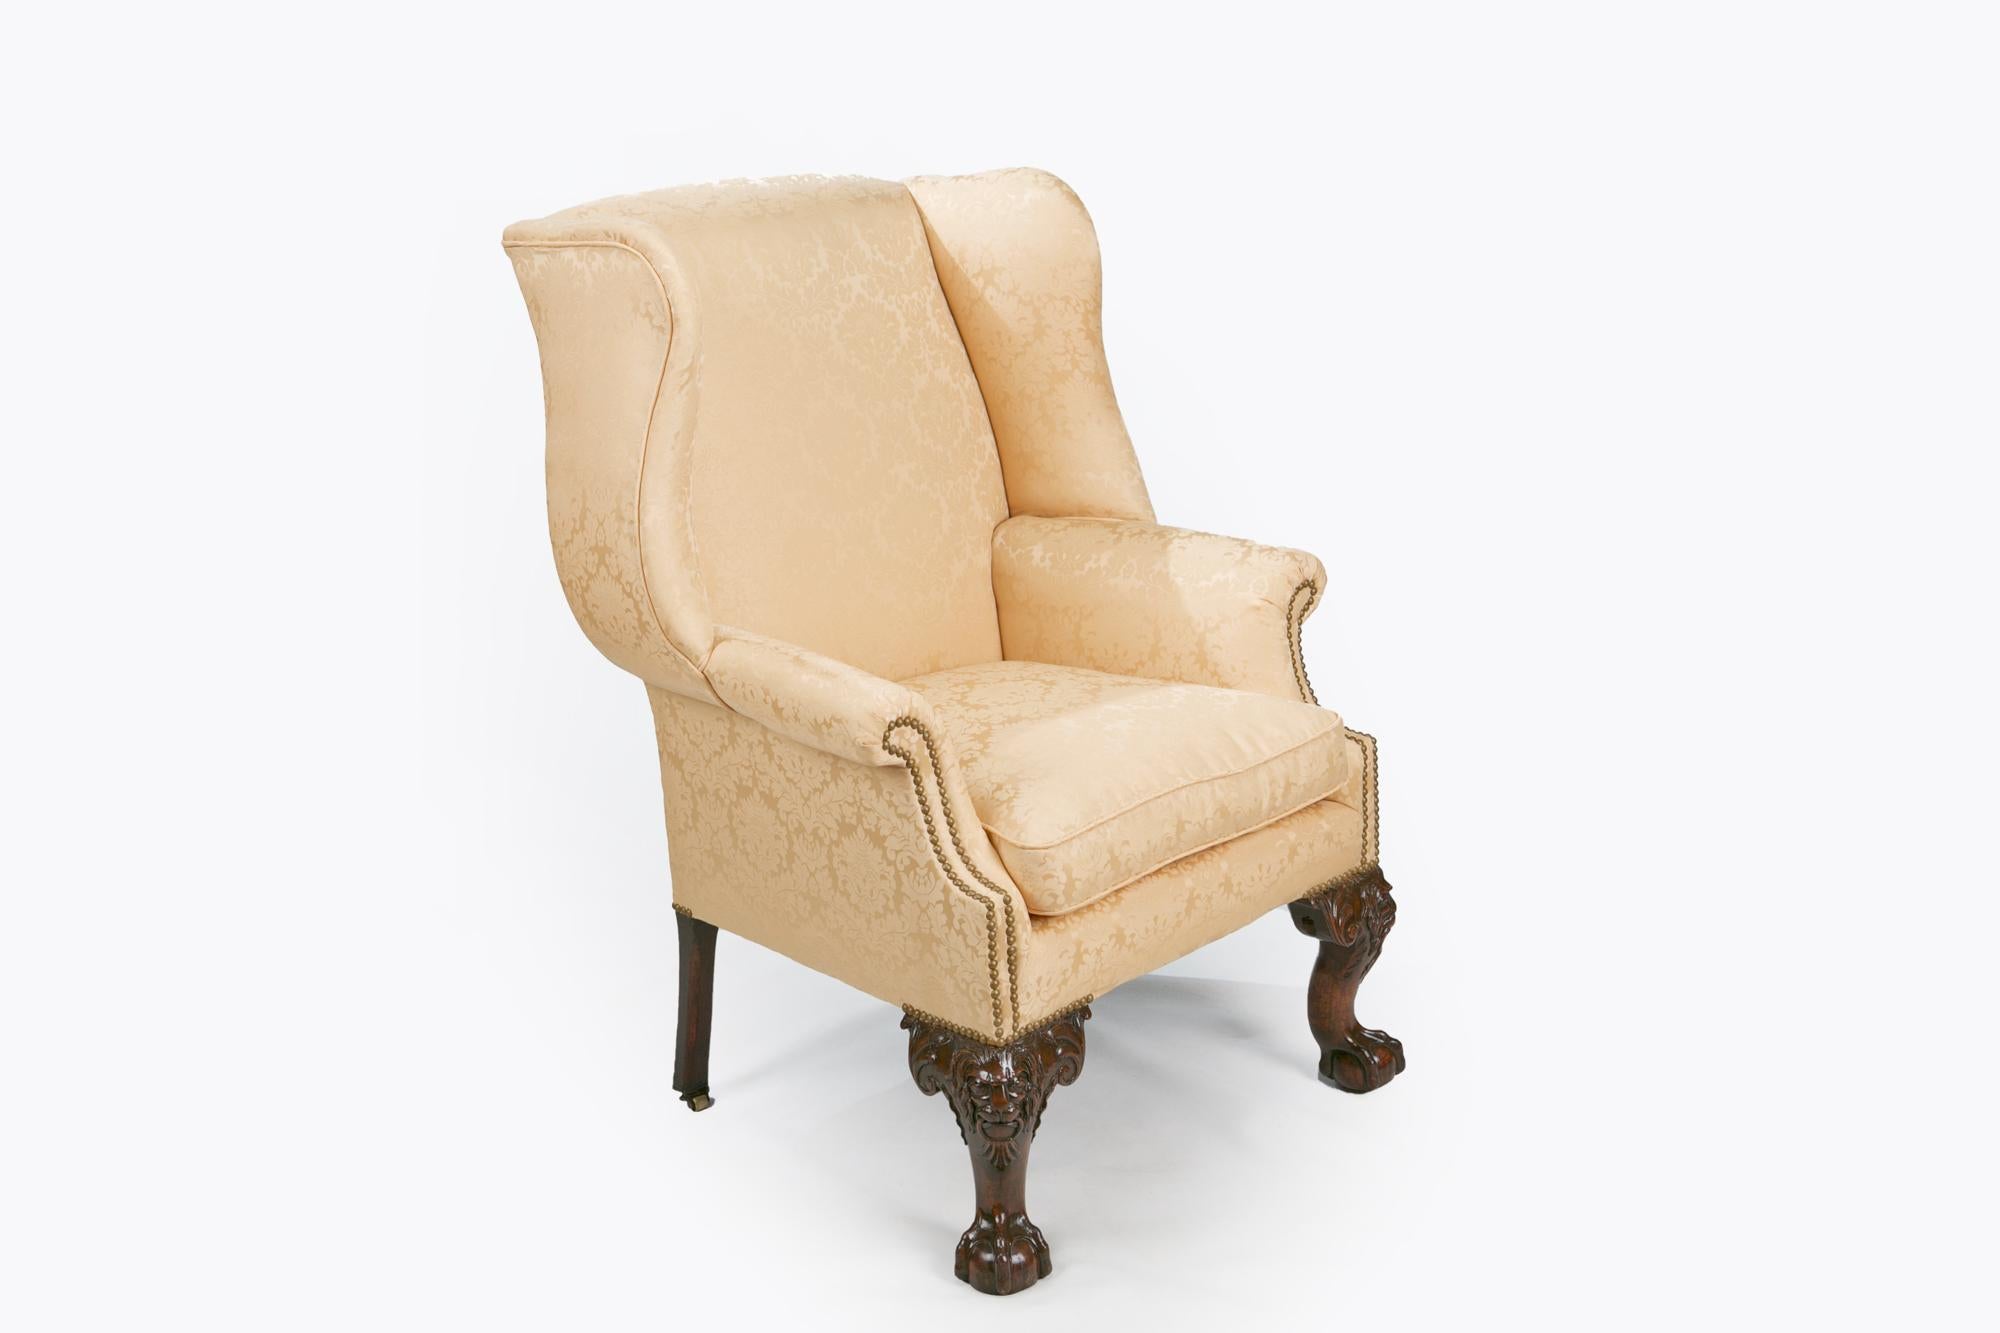 18th Century George III Wing Chair In Excellent Condition For Sale In Dublin 8, IE